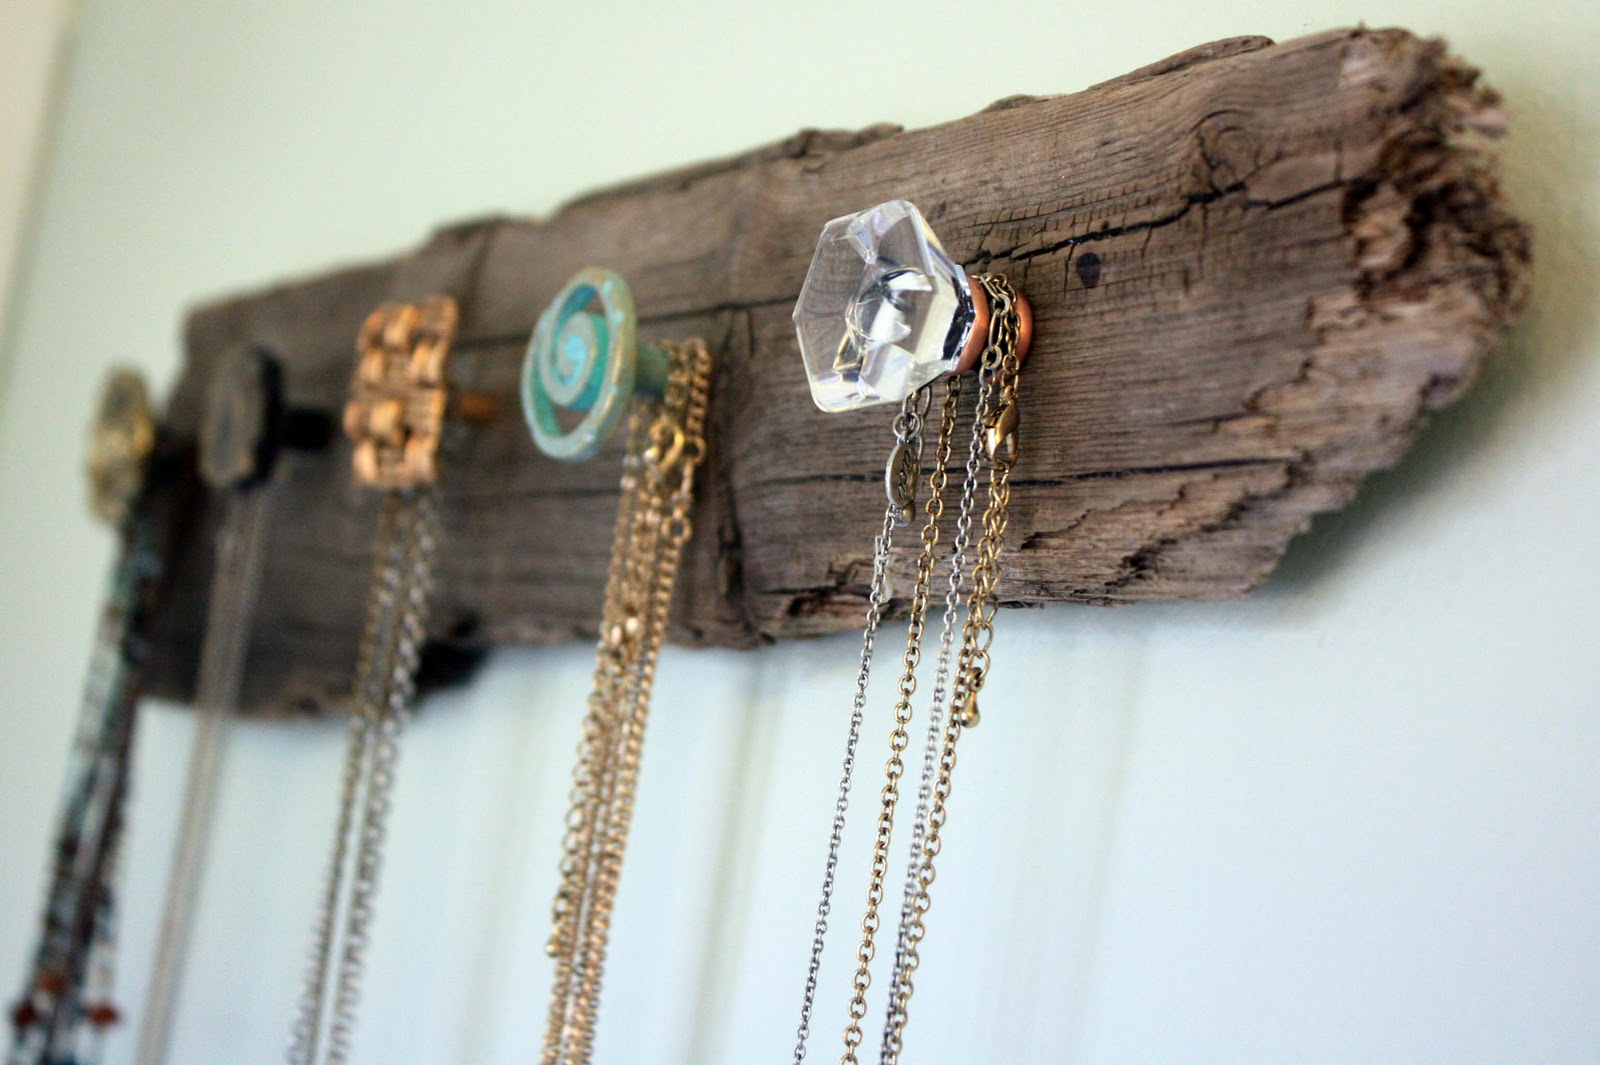 A DIY wood pallet jewelry holder used for necklace storage.